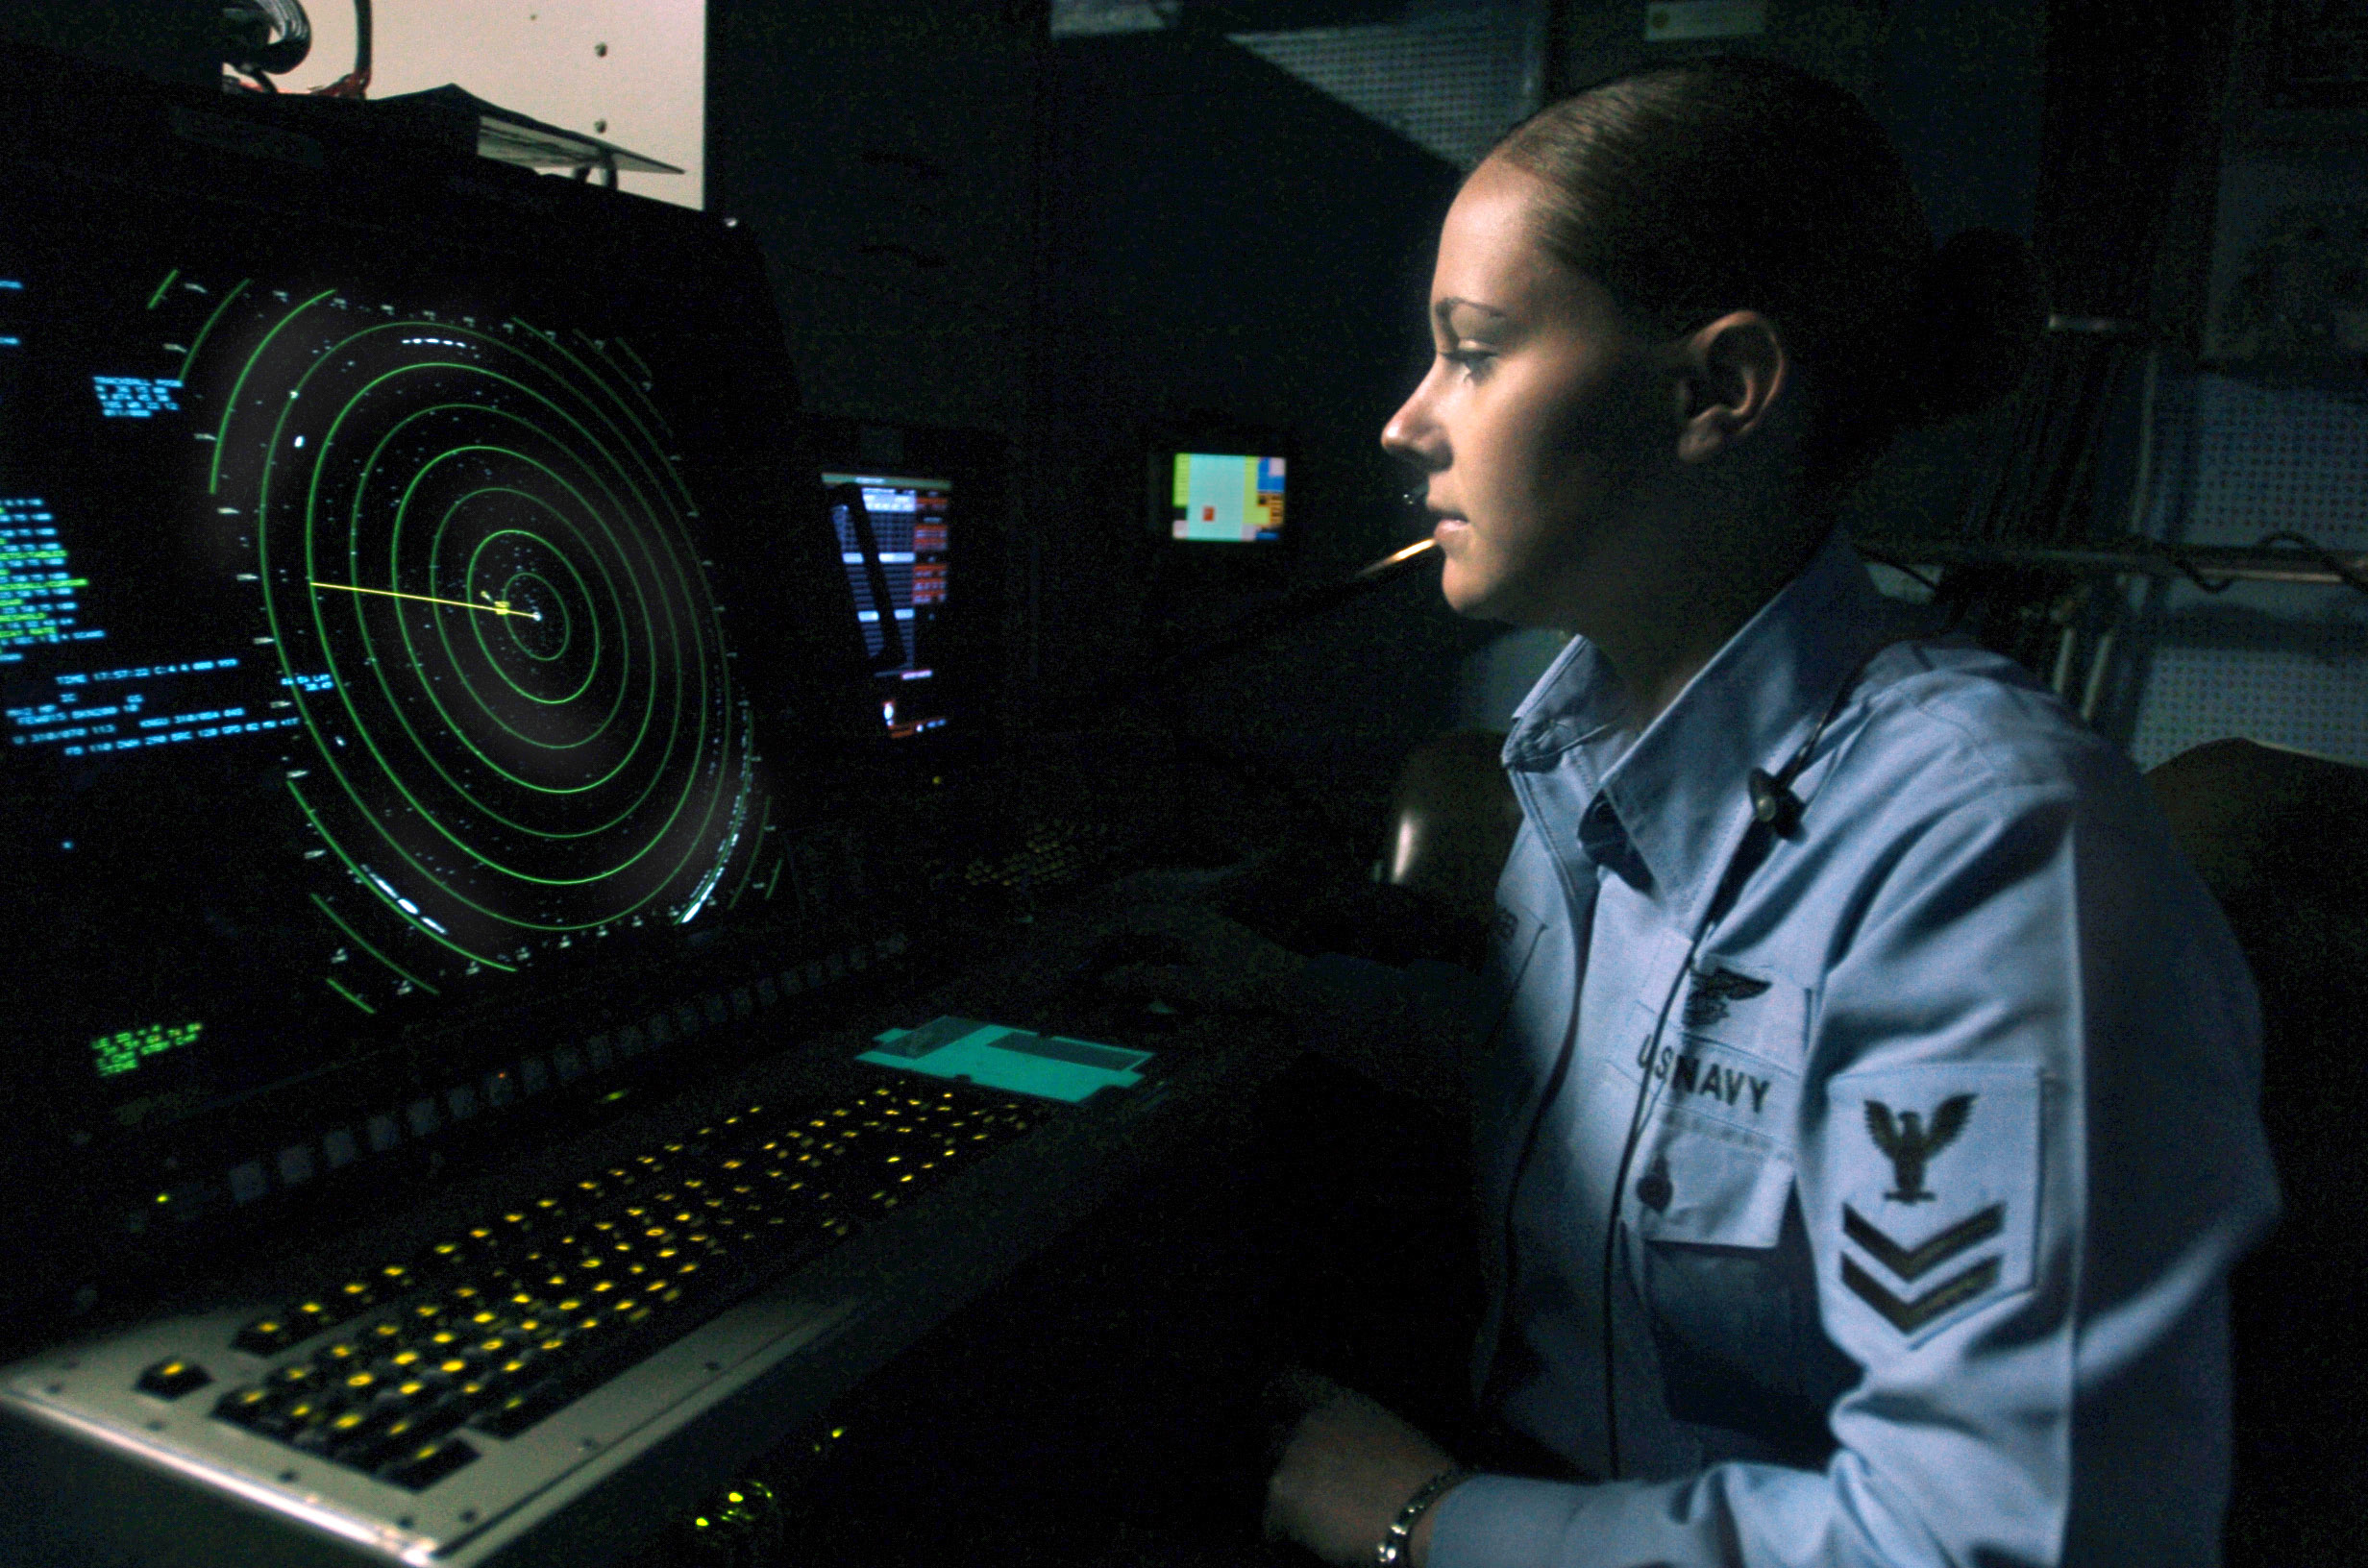 US Navy 061209-N-5248R-001 Air Traffic Controller 2nd Class Emmily Trolinger from Farmington, Mo., stands watch as aircraft departure controller in Carrier Air Traffic Control Center